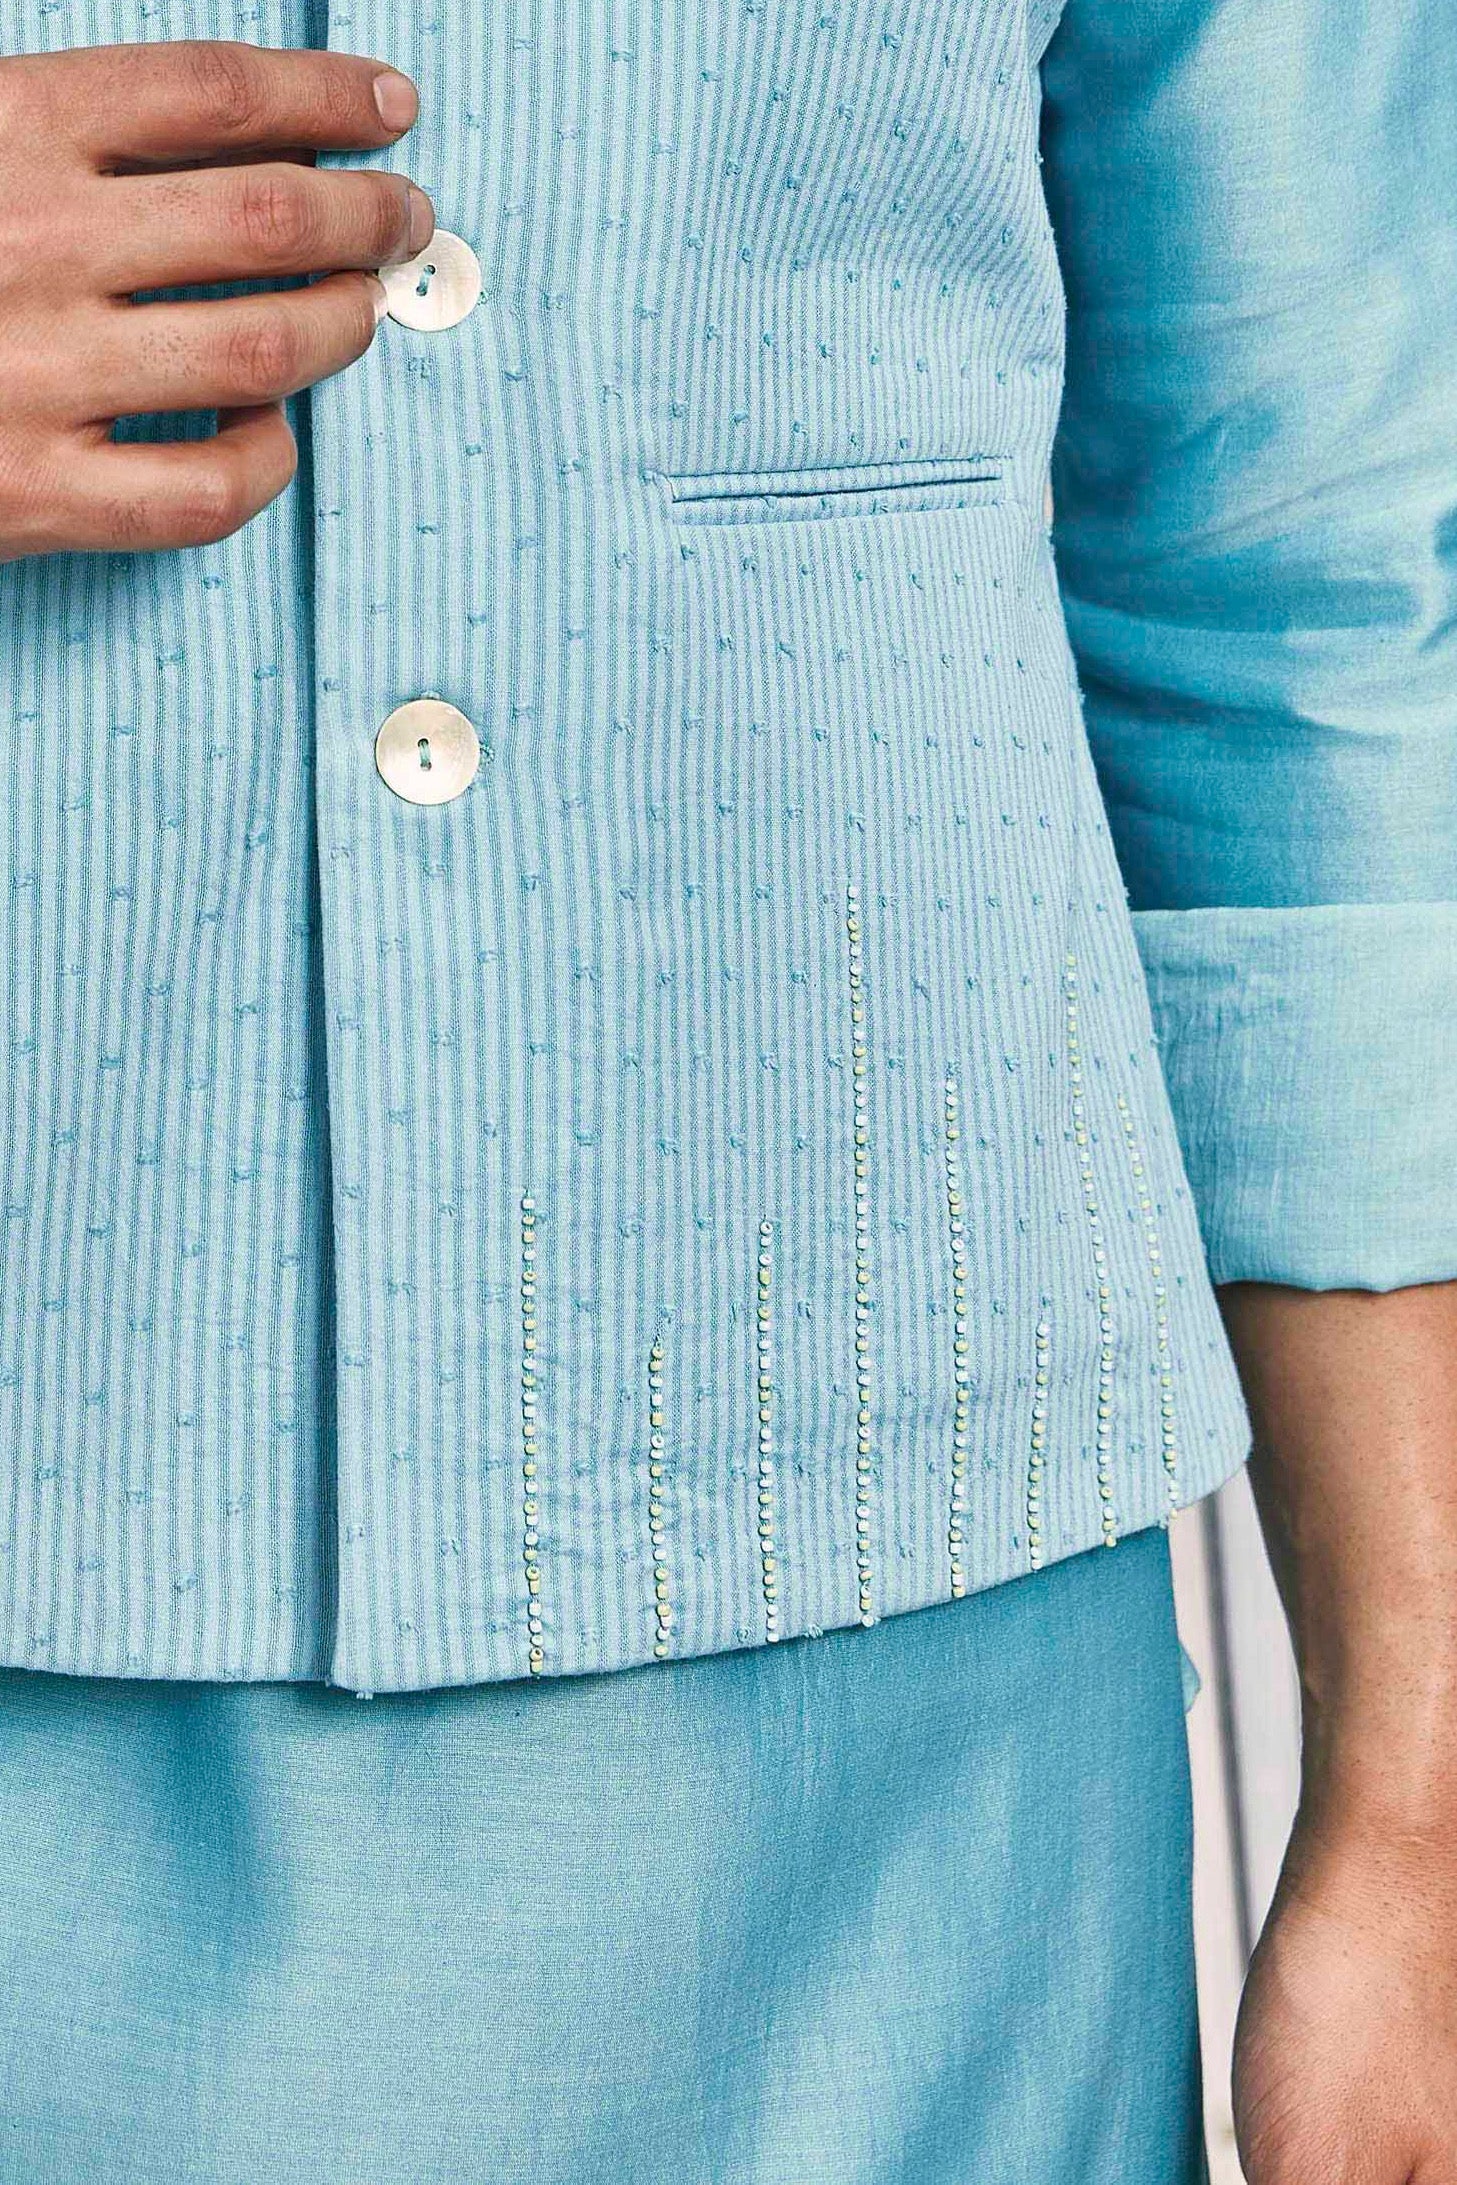 Cotton Bundi Jacket - Blue by Charkhee with Best Selling, Blue, Cotton, Dobby Cotton, Festive Wear, Indian Wear, Indianwear Jackets, Jackets, Mens Overlay, Menswear, Natural, Regular Fit, Shores 23, Textured at Kamakhyaa for sustainable fashion